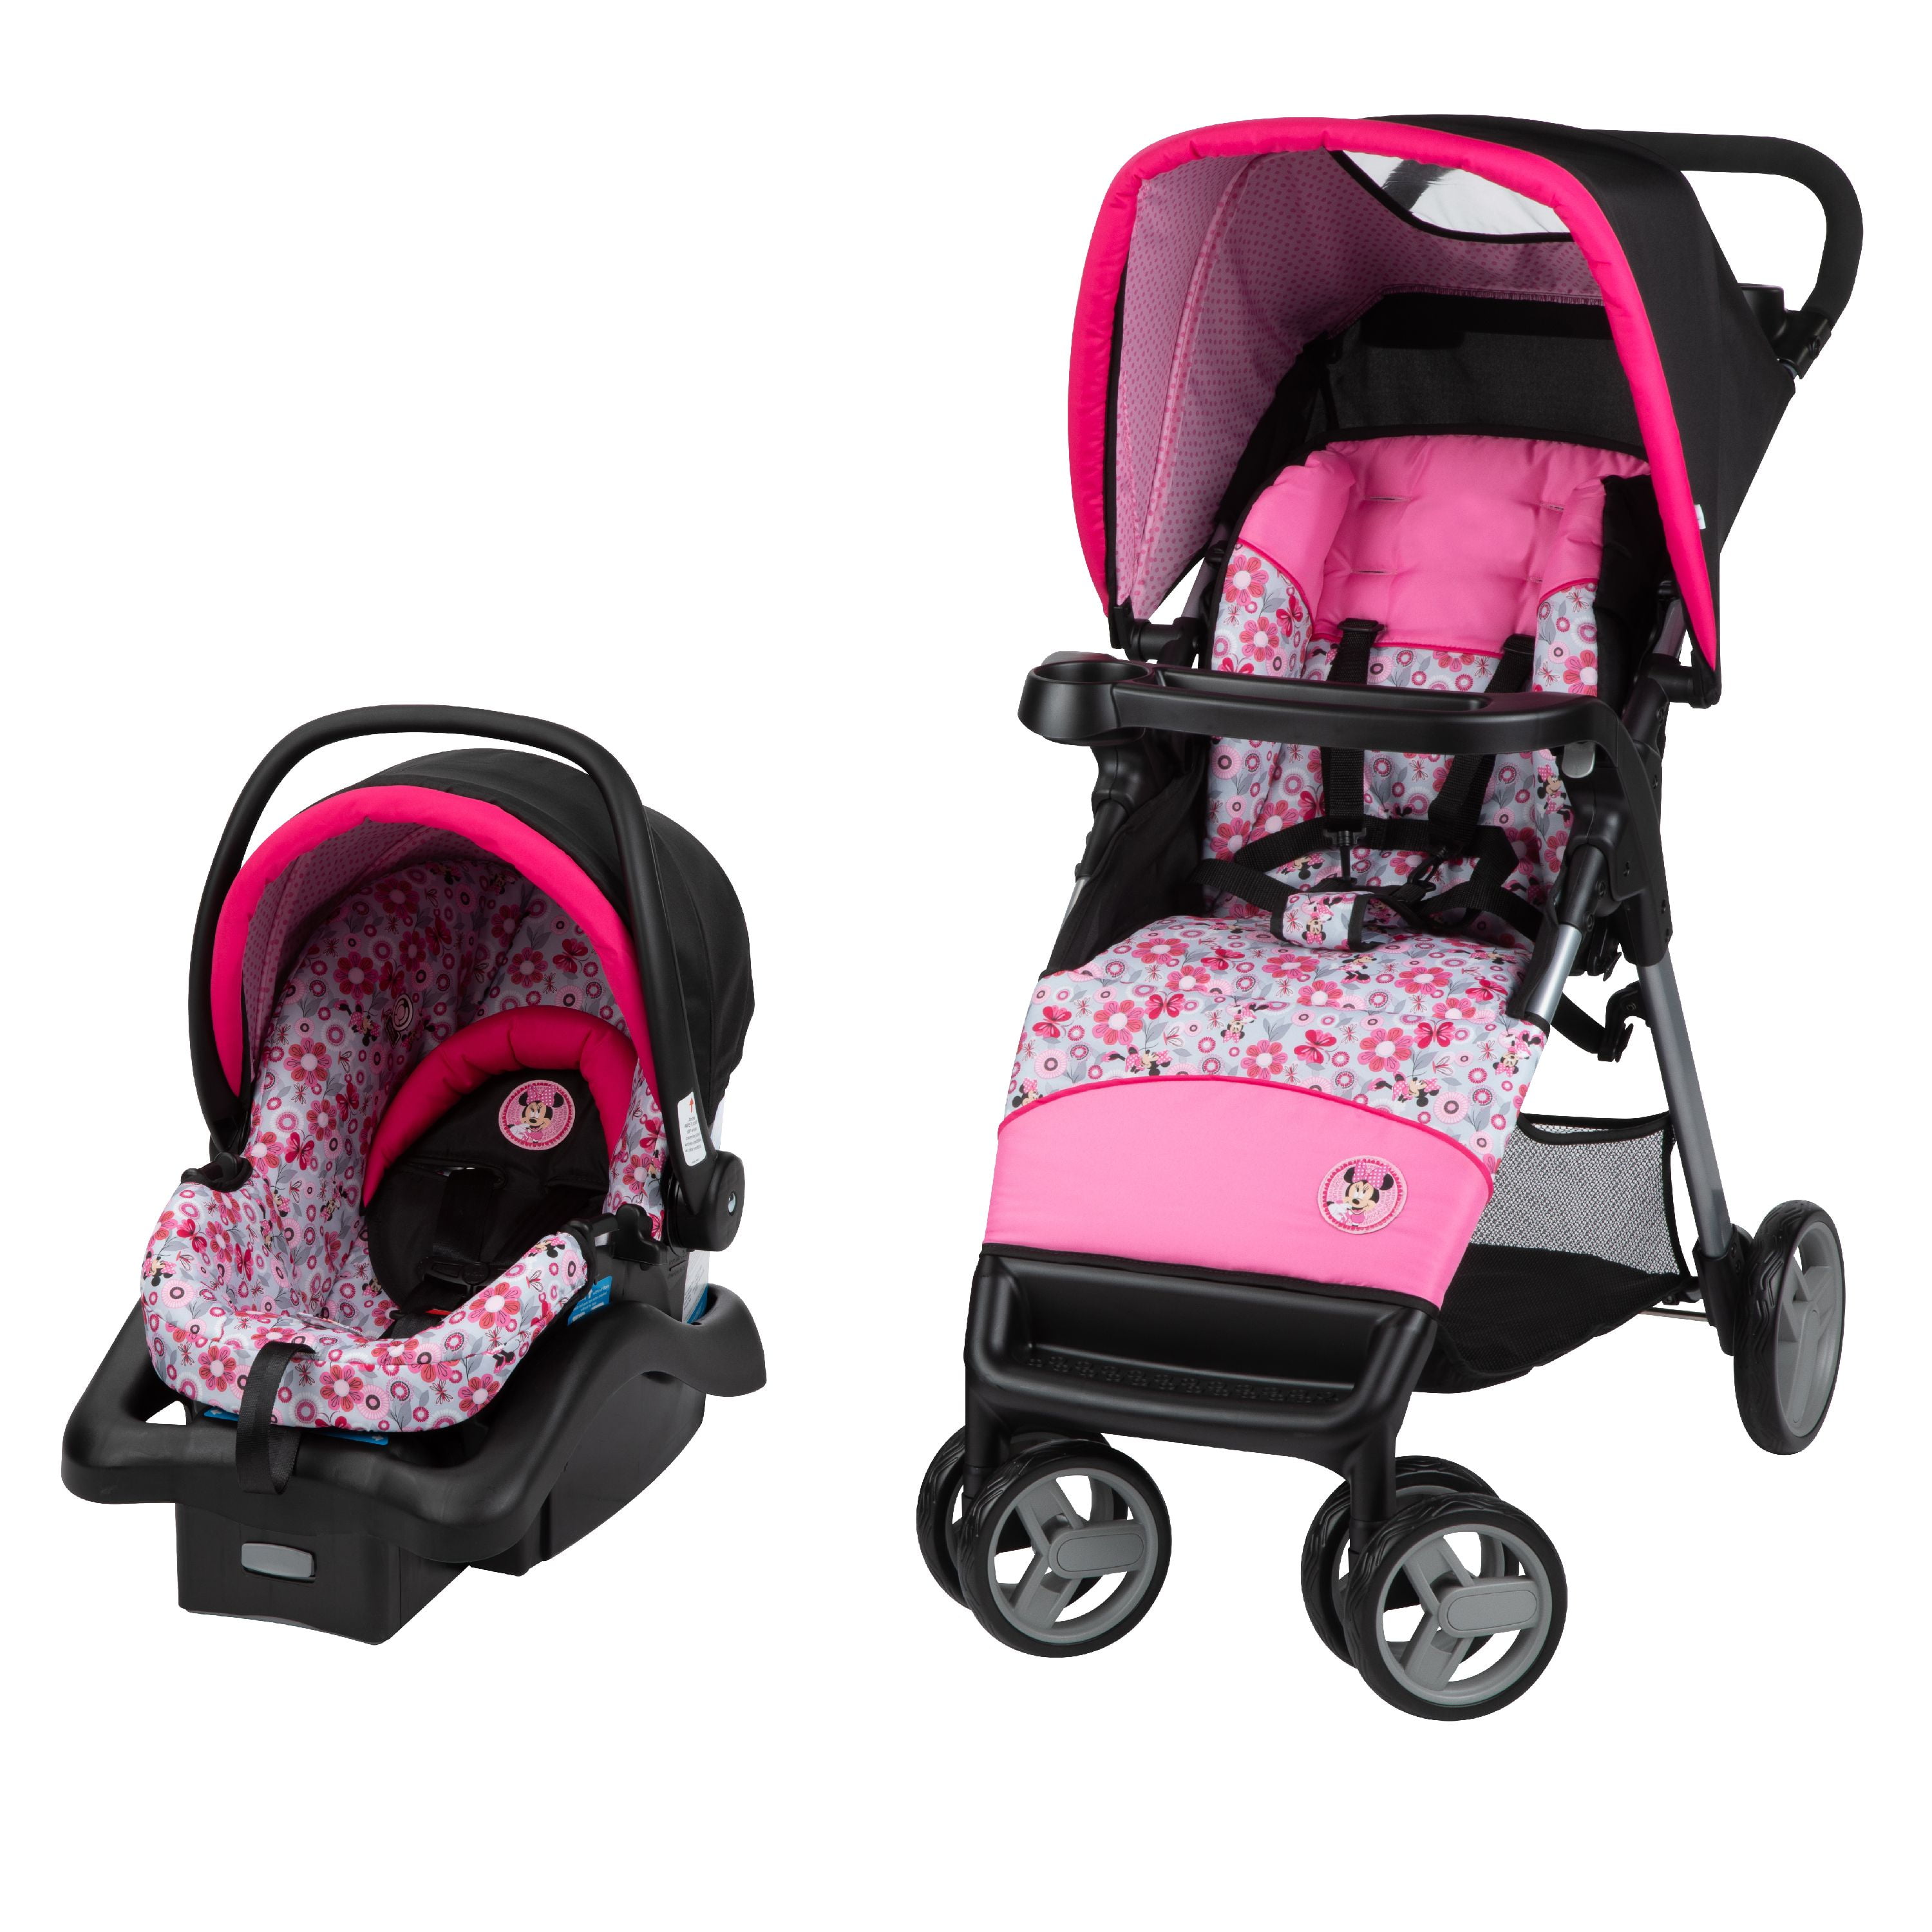 minnie mouse car seat and stroller set